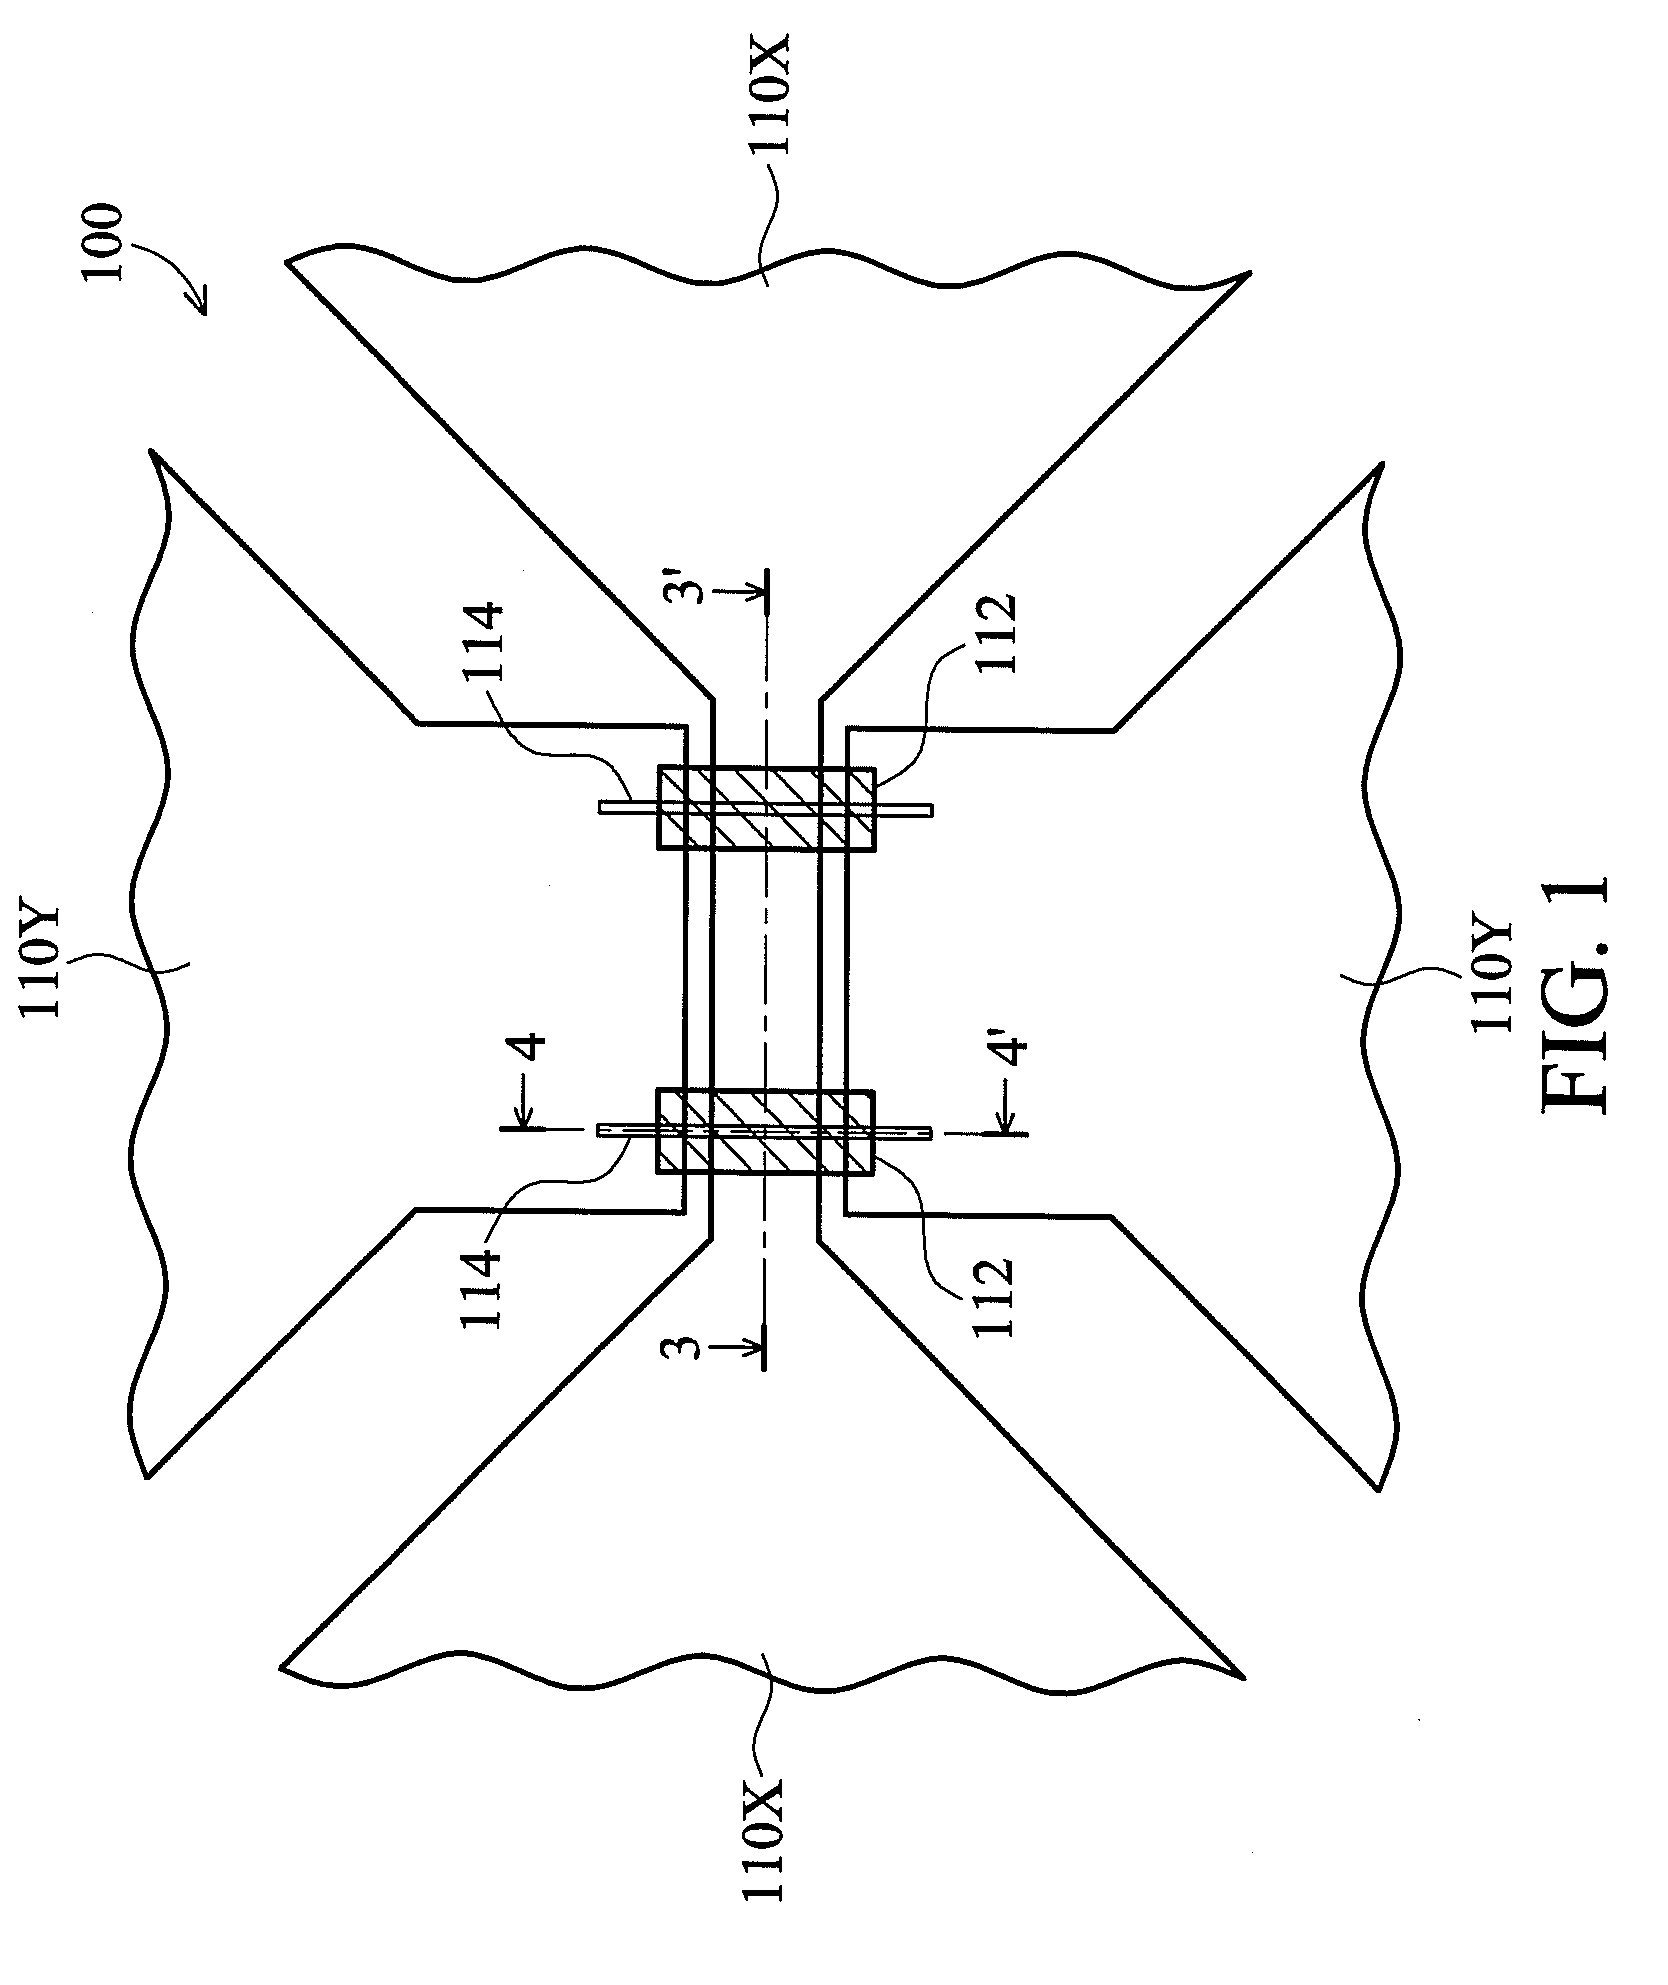 Touch display device